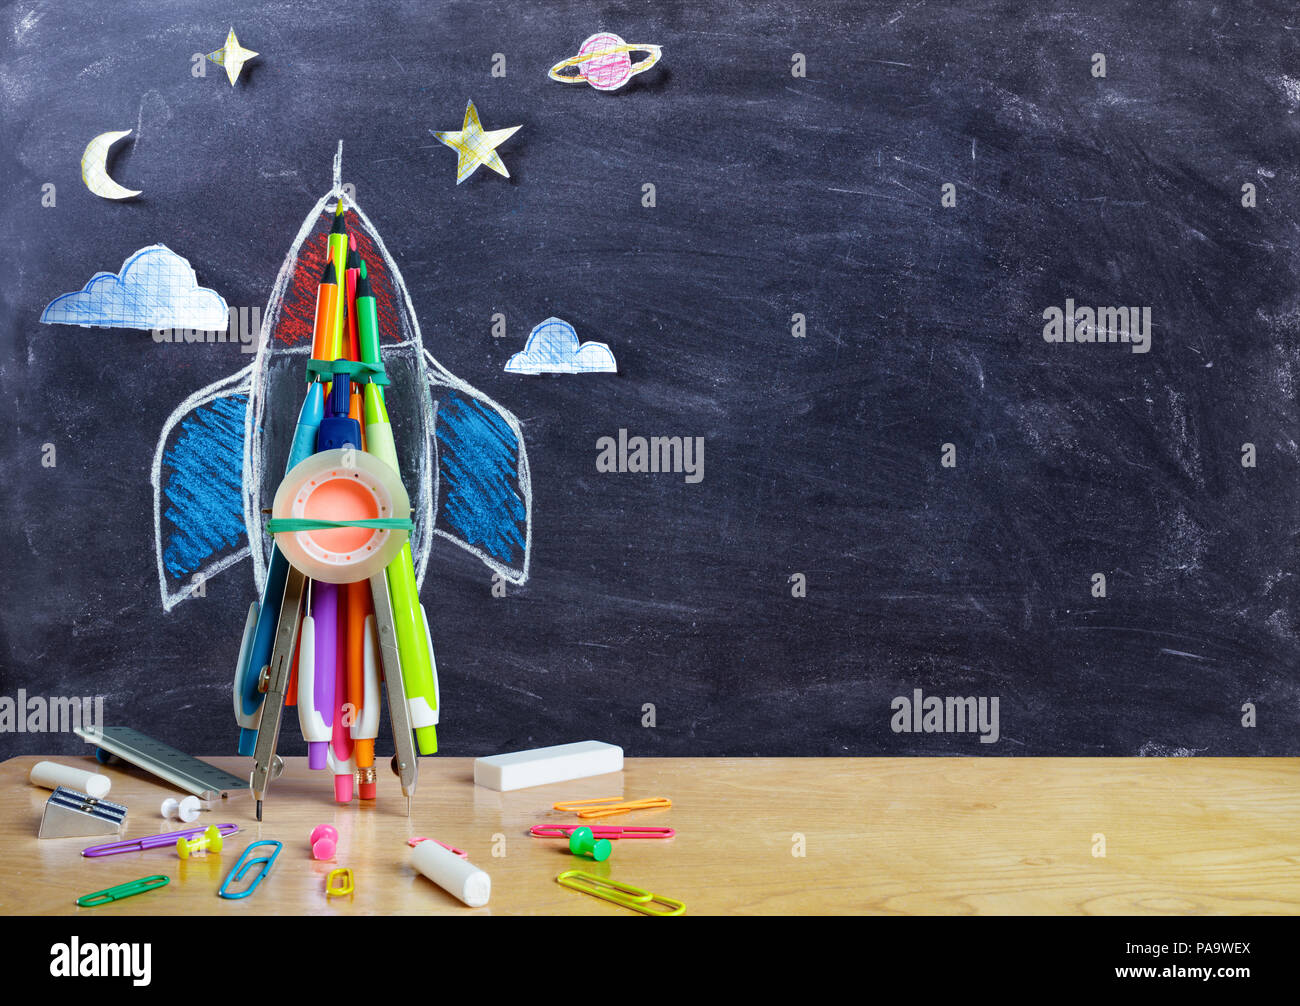 Startup - Rocket Drawing With School Supplies On Table Stock Photo